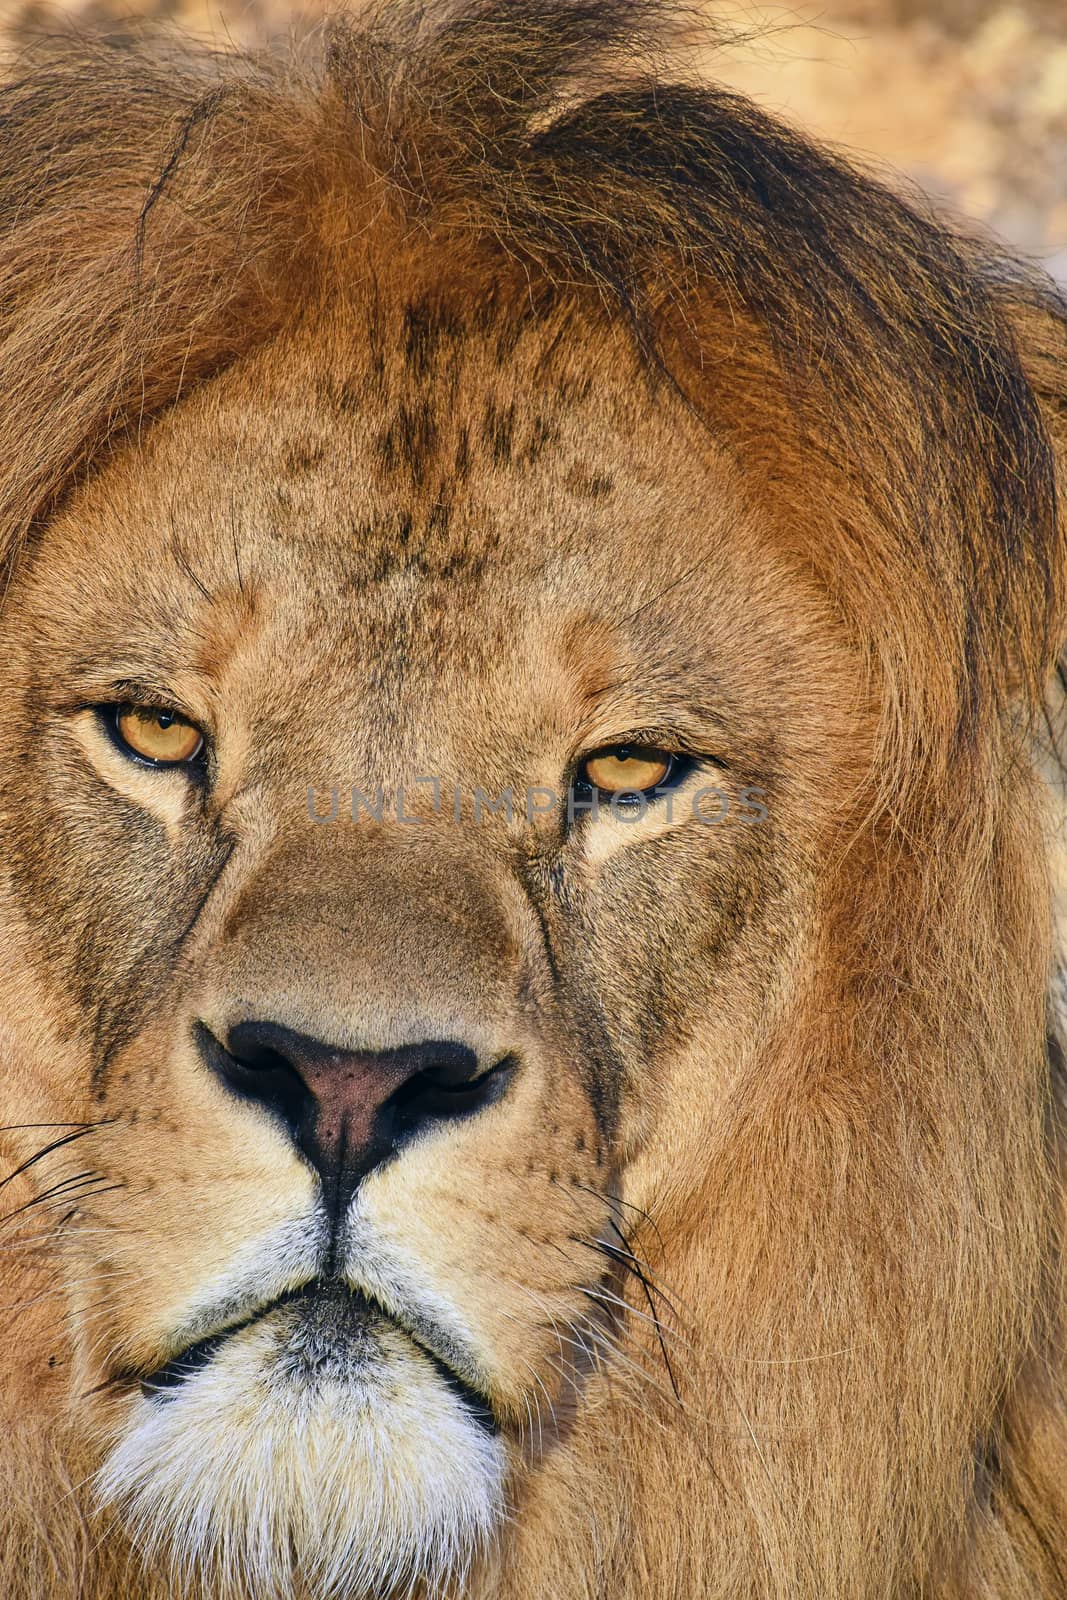 Close up portrait of mature male African lion with beautiful mane, looking at camera